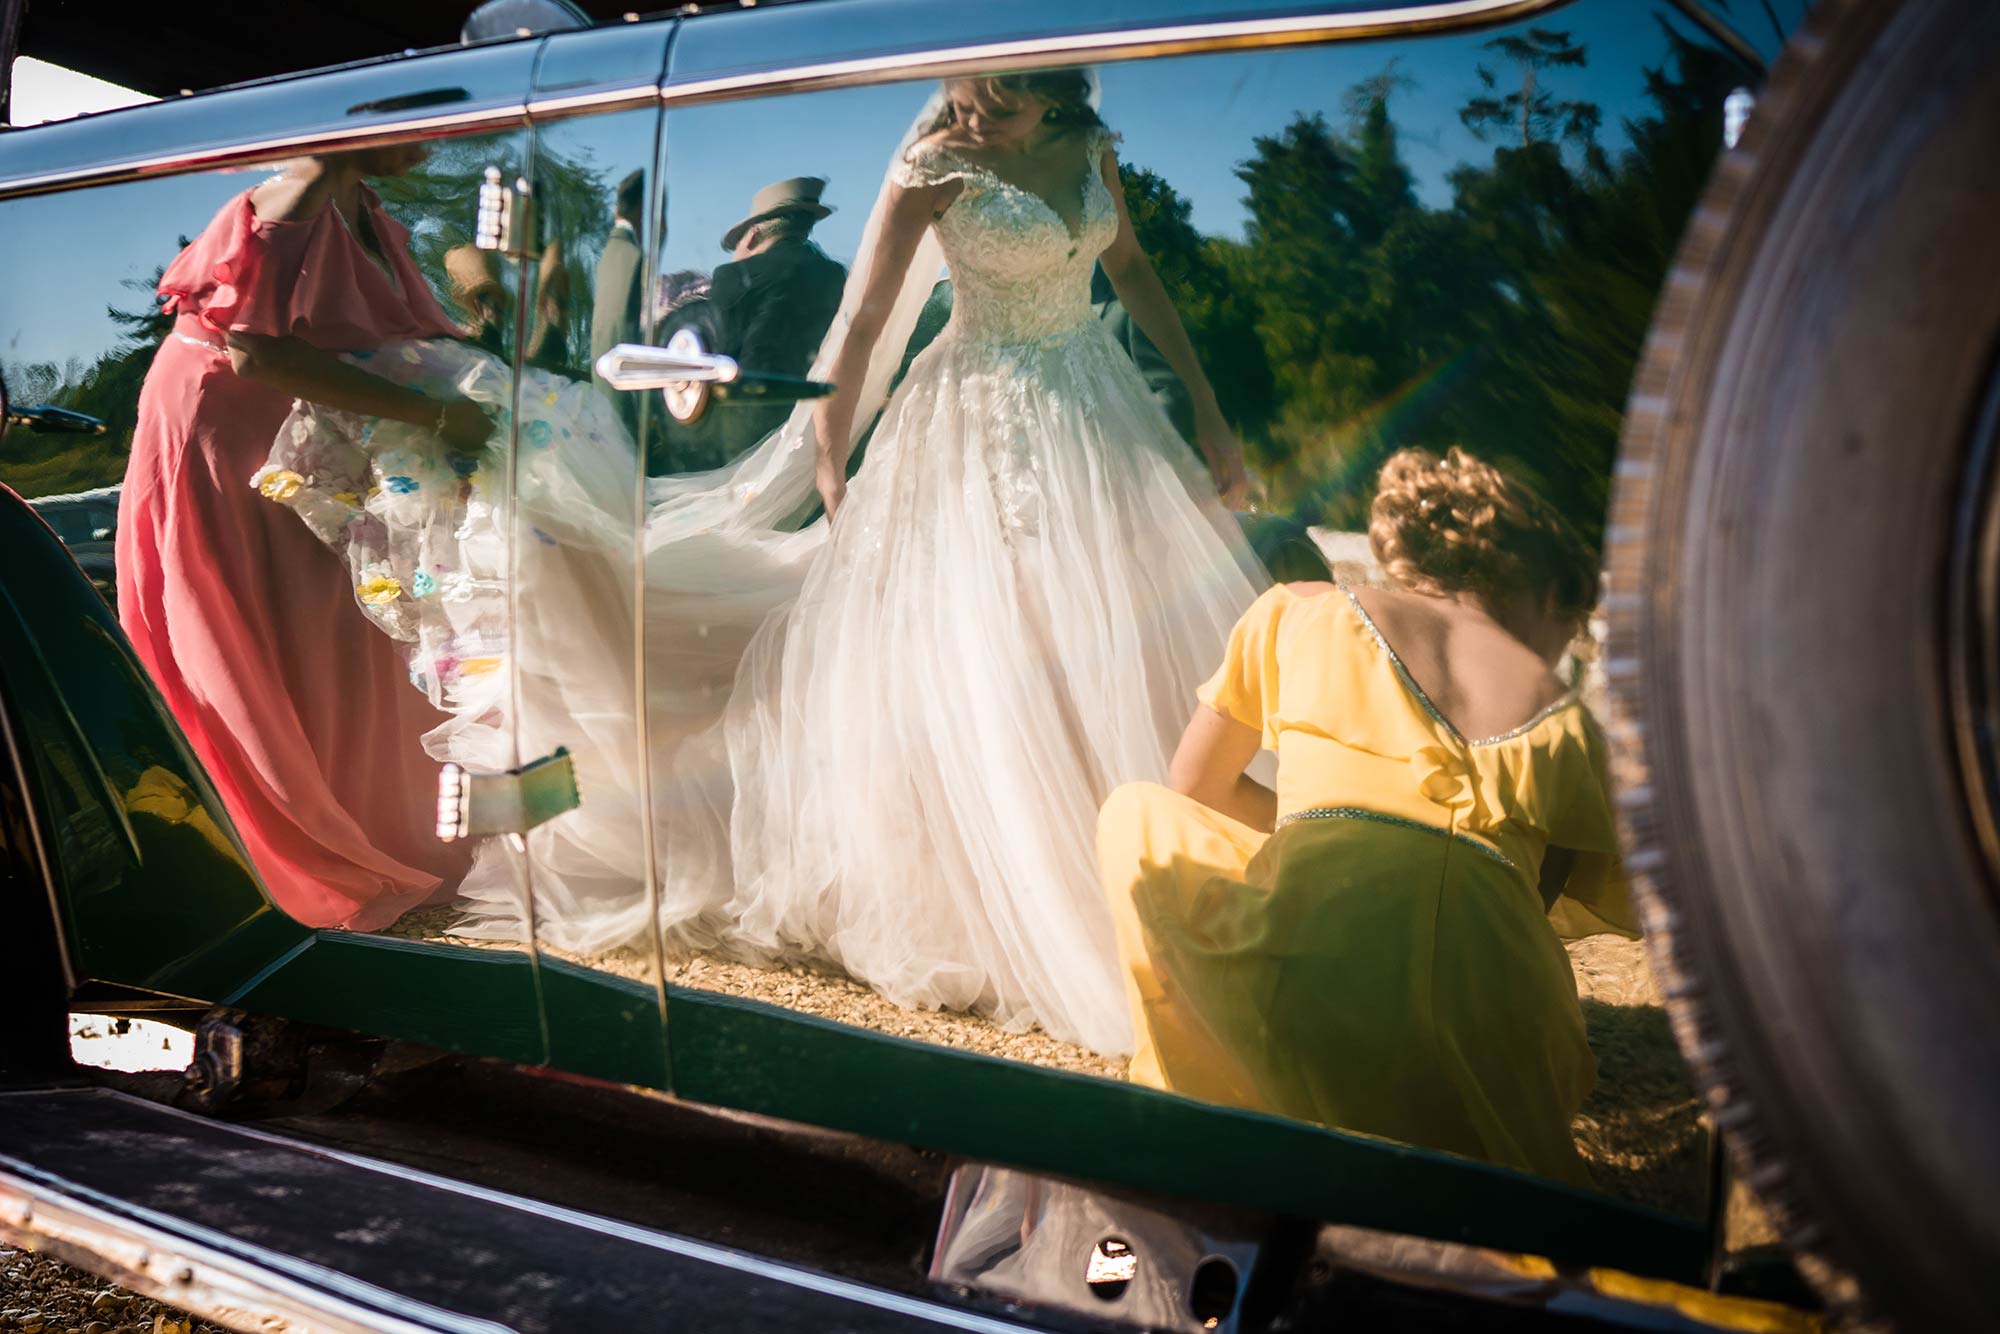 Colourful and energetic wedding photography by Smiling Tiger Studios in Dorset